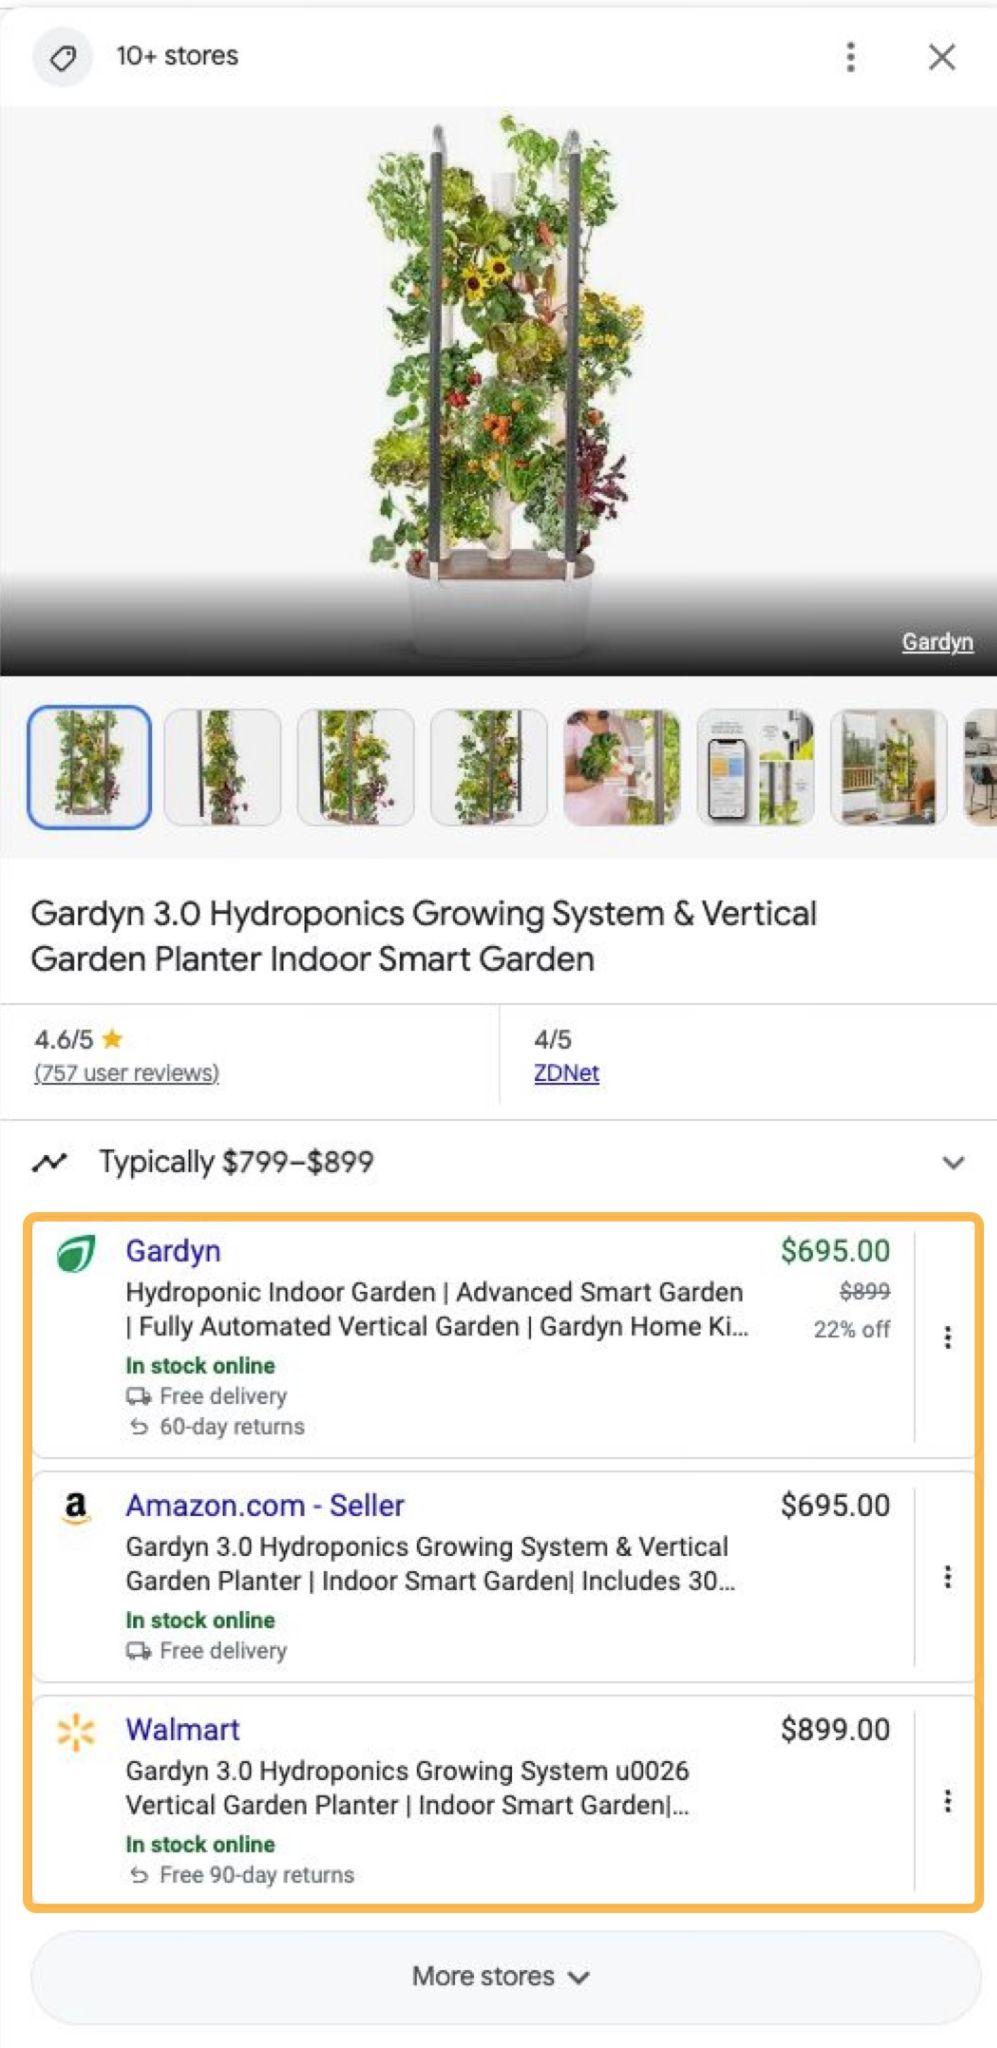 Product panel that opens in Google's interface directing searchers to a number of merchant's selling the same product.